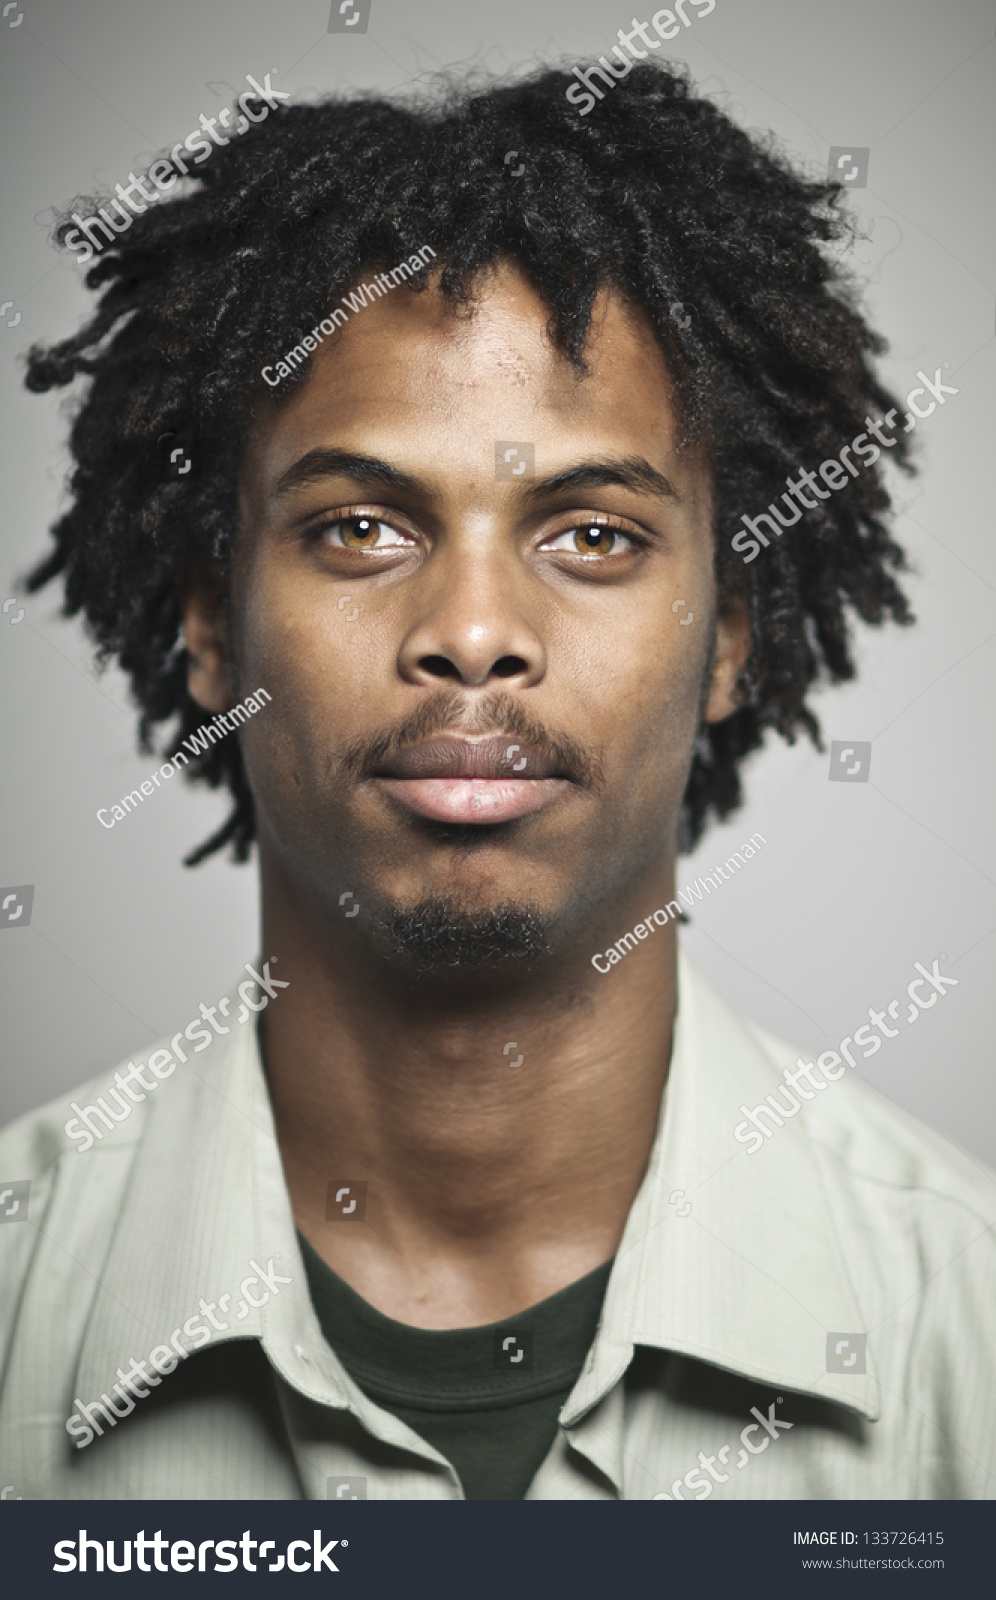 Blank Expression Young African American Man Stock Photo 133726415 ...